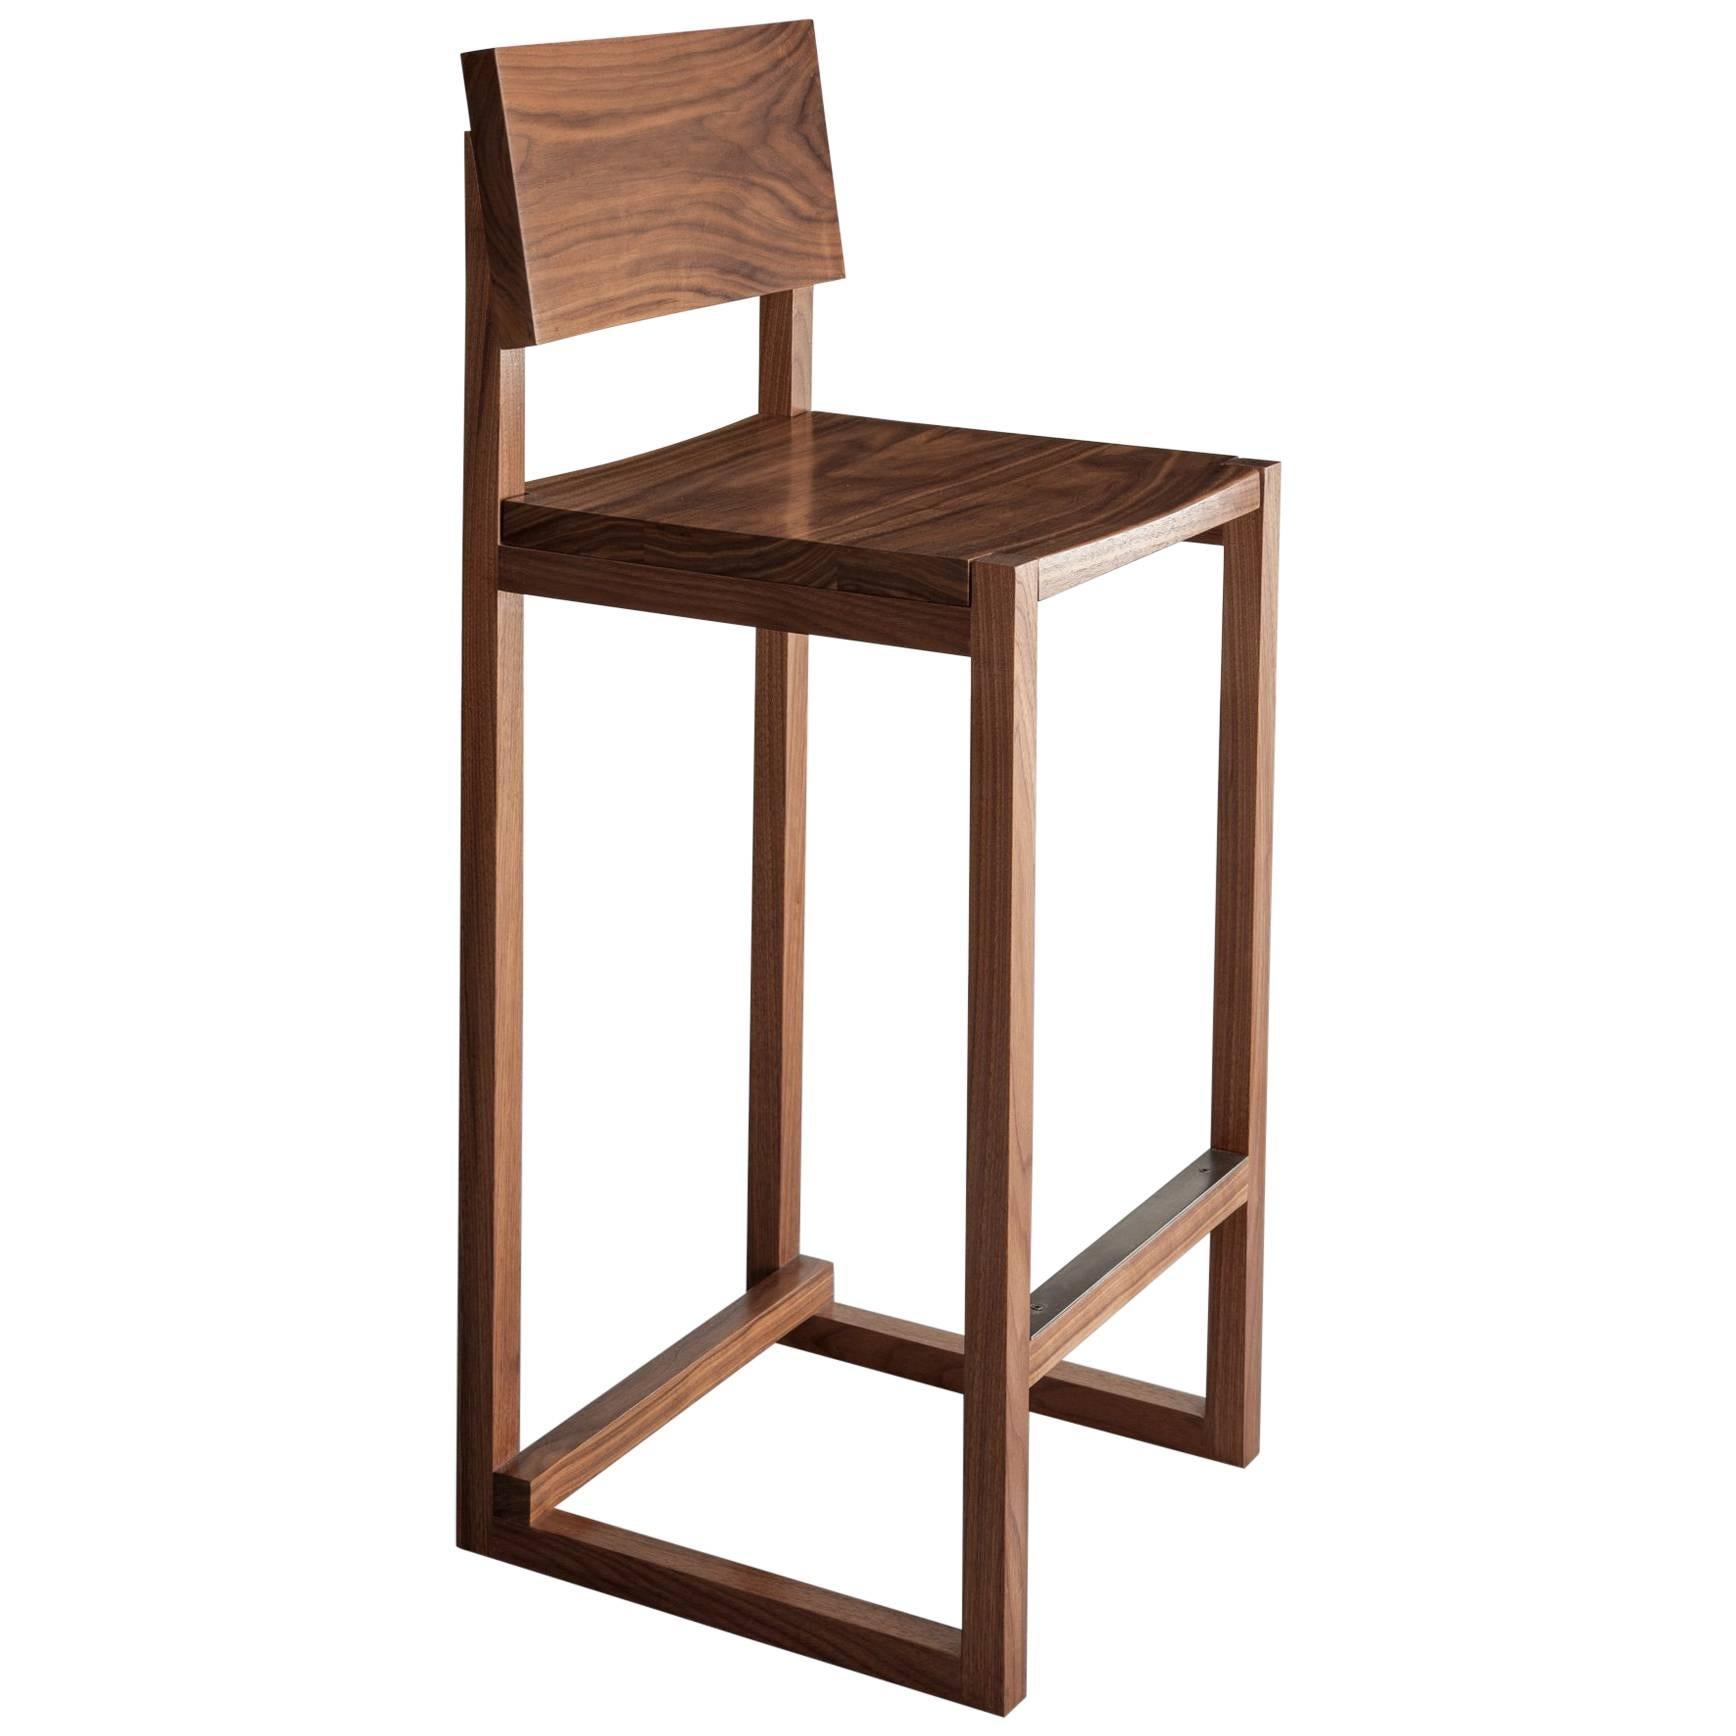 SQ Bar Stool, Walnut Hardwood, Available in counter height 